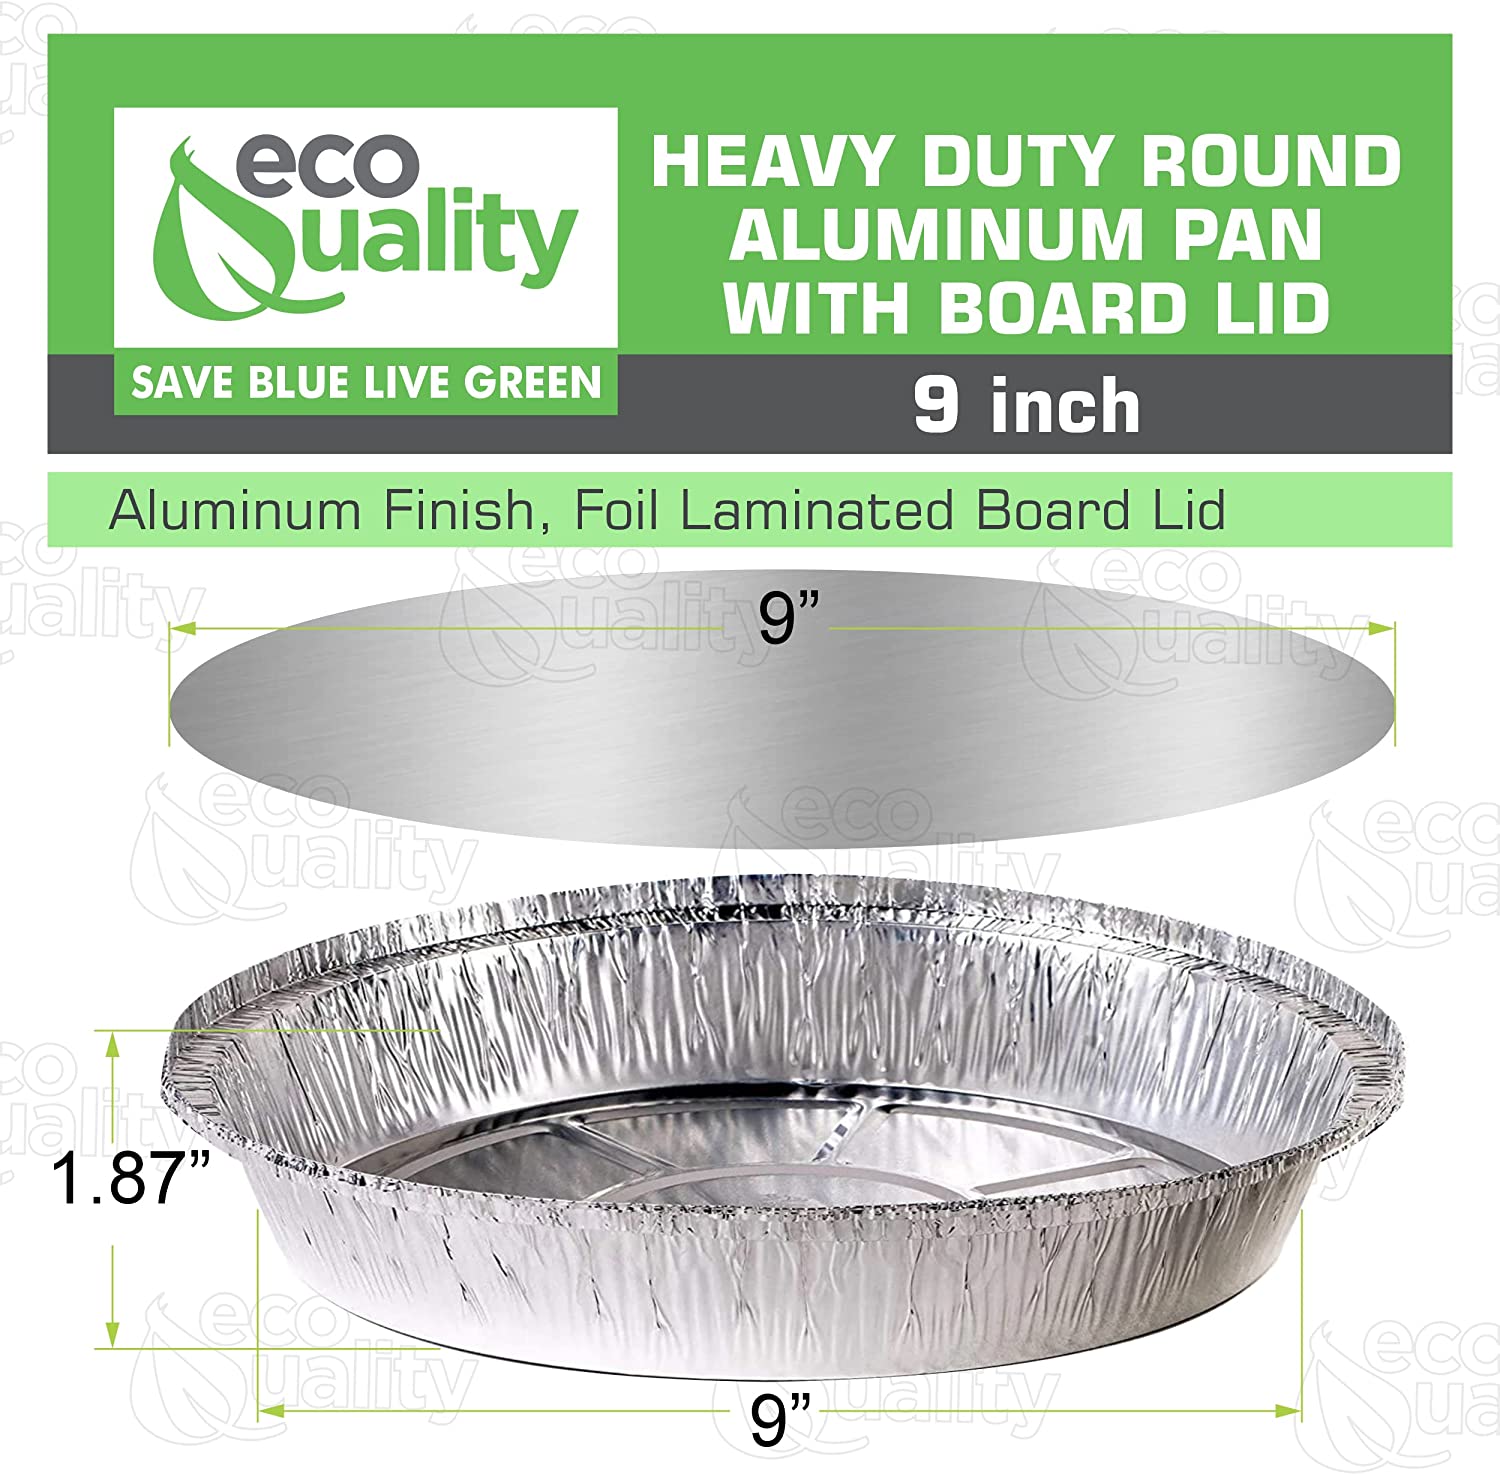 disposable with flat board lid Take out to go container tin stackable round leak proof serve Cold hot food Round Foil Aluminum Pan Restaurant Meal Prep Food Trucks Plastic High Quality Recyclable Aluminum hemmed edges silver heavy duty strong sturdy freezer safe reusable recyclable entrees appetizers sides desserts dinner lunch breakfast Container Caterers Buffet Baking Oven Cake Supplies affordable bulk economical commercial wholesale 9 inches diameter 44 fluid ounces oz